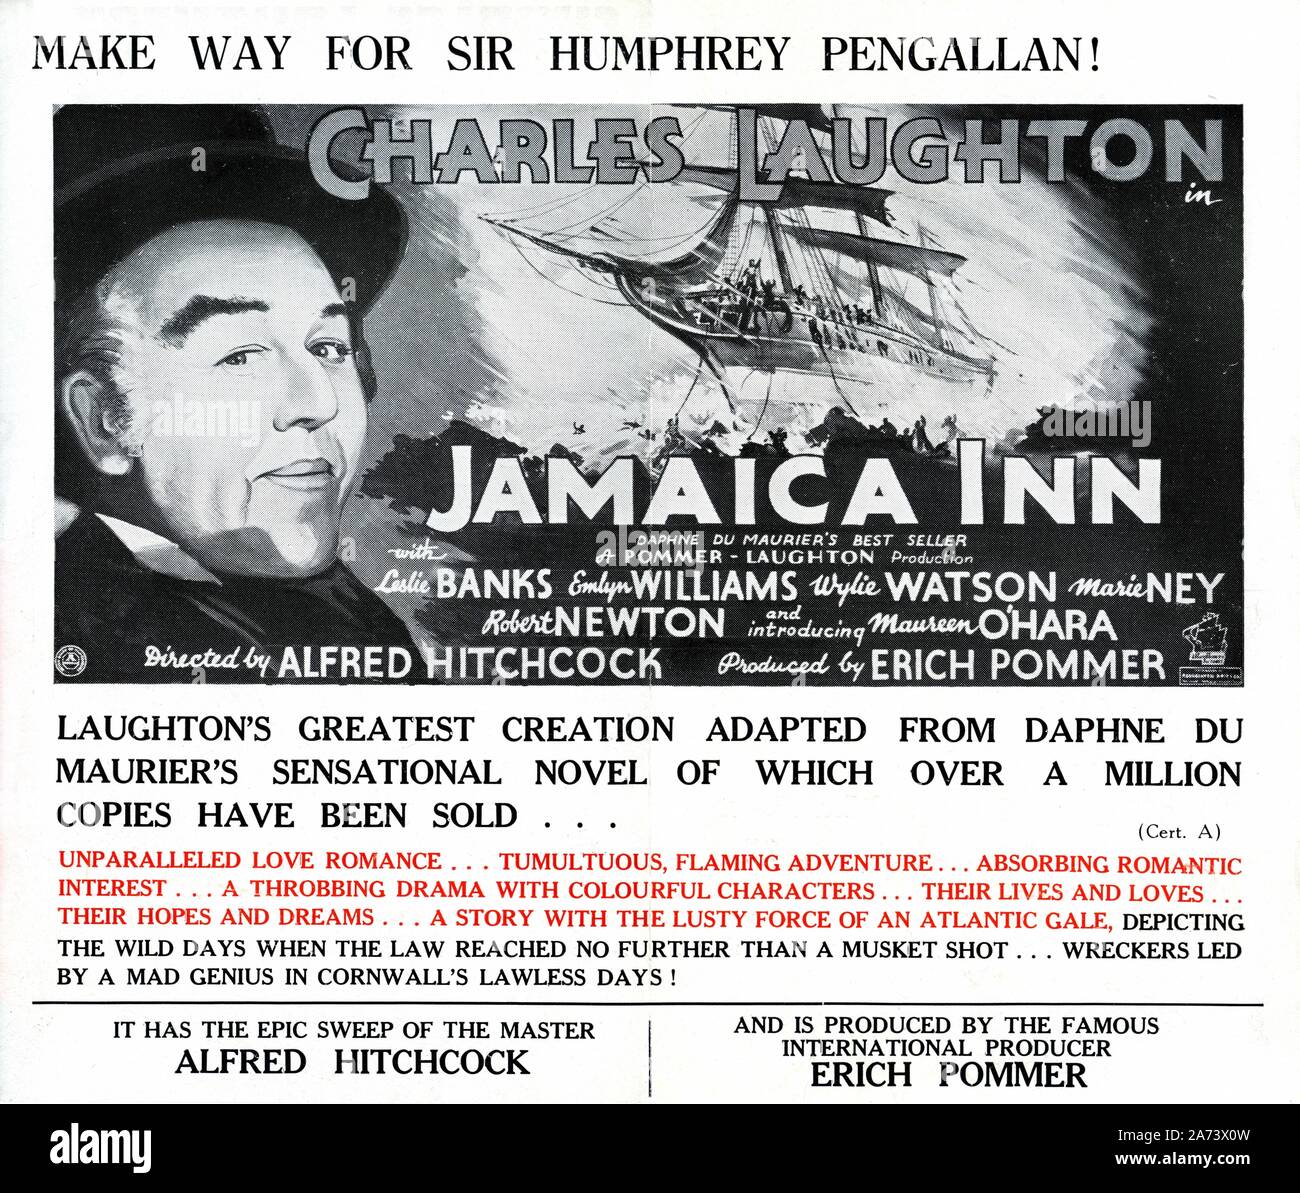 CHARLES LAUGHTON as Sir Humphrey Pengallan in JAMAICA INN 1939 director ALFRED HITCHCOCK novel DAPHNE DU MAURIER screenplay Sidney Gilliat Joan Harrison and J.B. Priestley producer Erich Pommer Mayflower Pictures Corporation / Associated British Picture Corporation (ABPC) Stock Photo